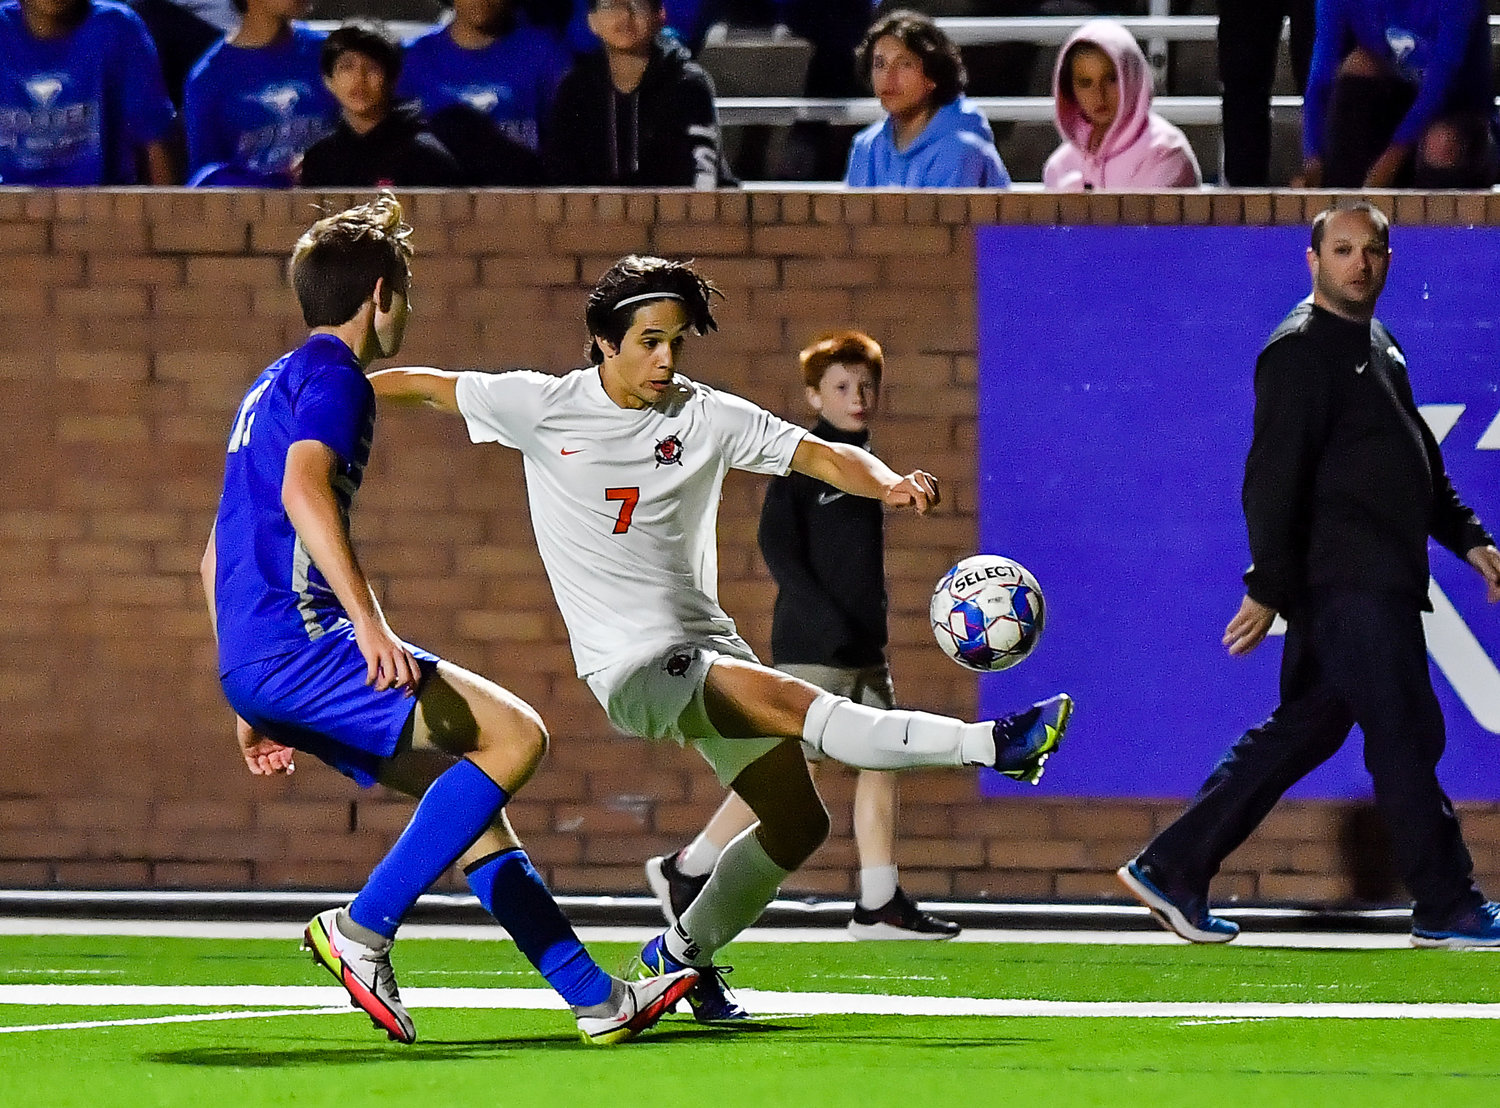 April 1, 2022: Seven Lakes Noa Stasic #7 passes the ball off during Regional Quarterfinal soccer playoff, Seven Lakes vs Katy Taylor at Rhode Stadium. (Photo by Mark Goodman / Katy Times)